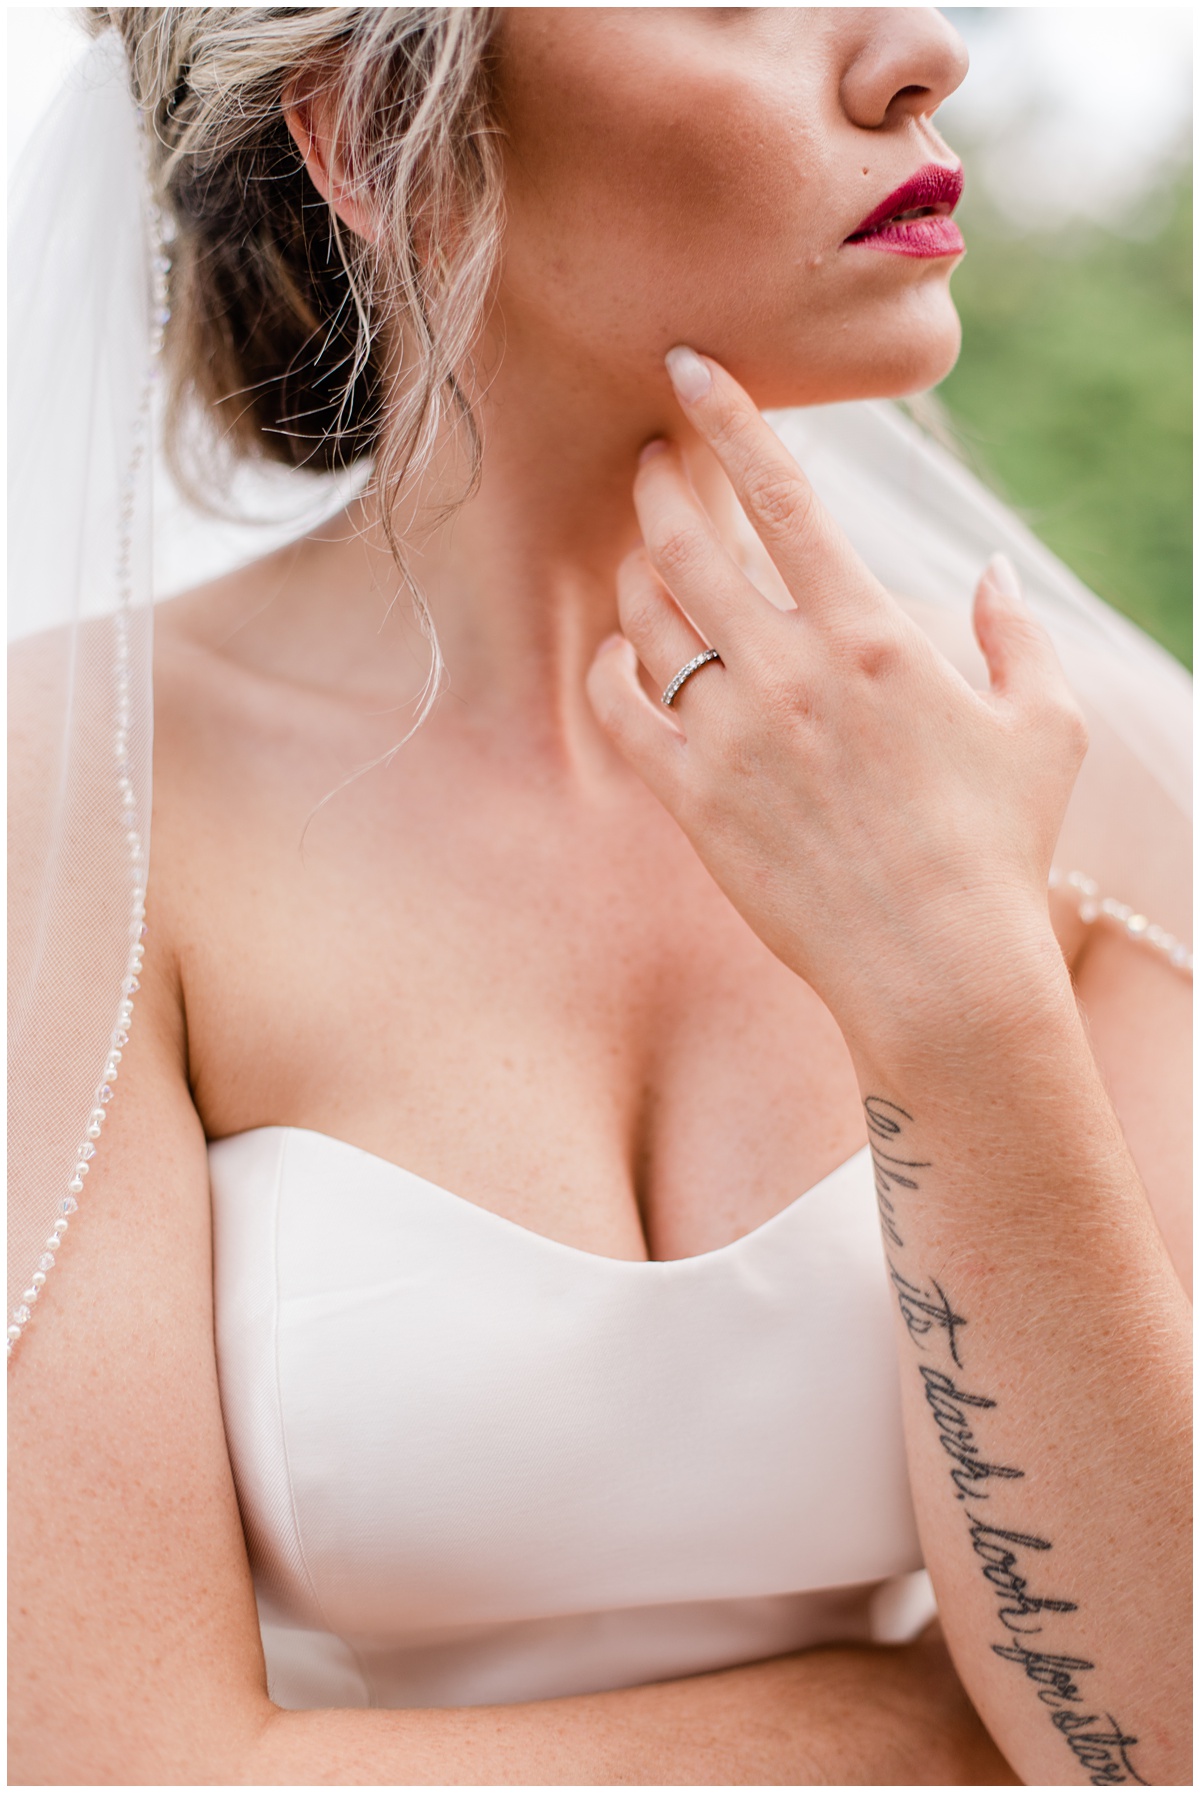 bride wearing a simple gown with an up do, runs a slender finger along the side of her face and displays the writing of her tattoos on her arm and a pop of purple lipstic. Dear Bride series on wedding planning